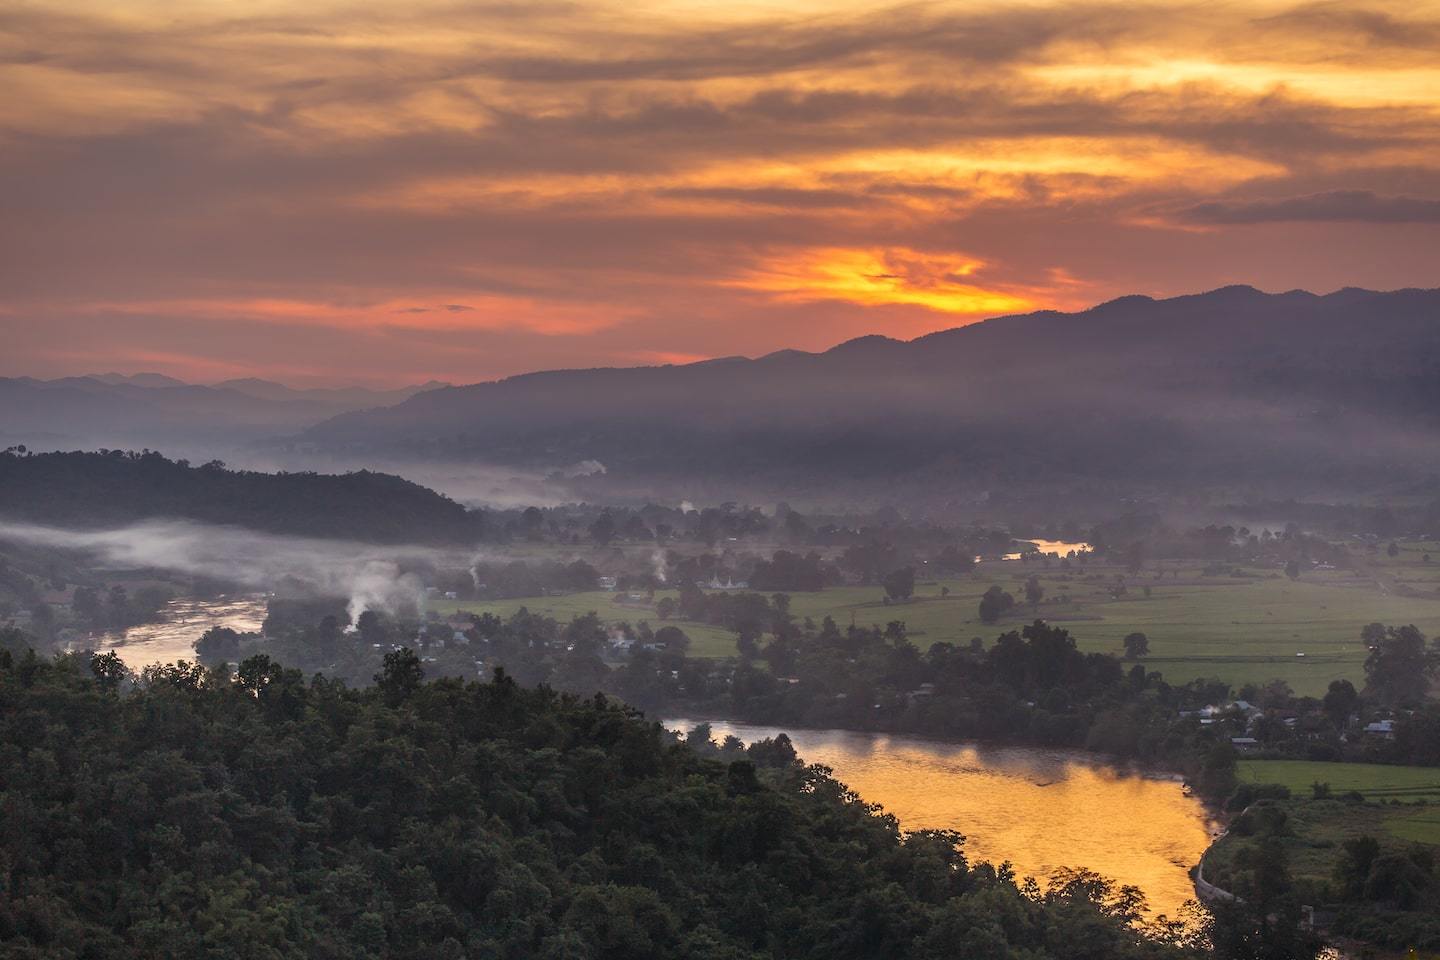 Sunset over Hsipaw myanmar with river and mountains in background